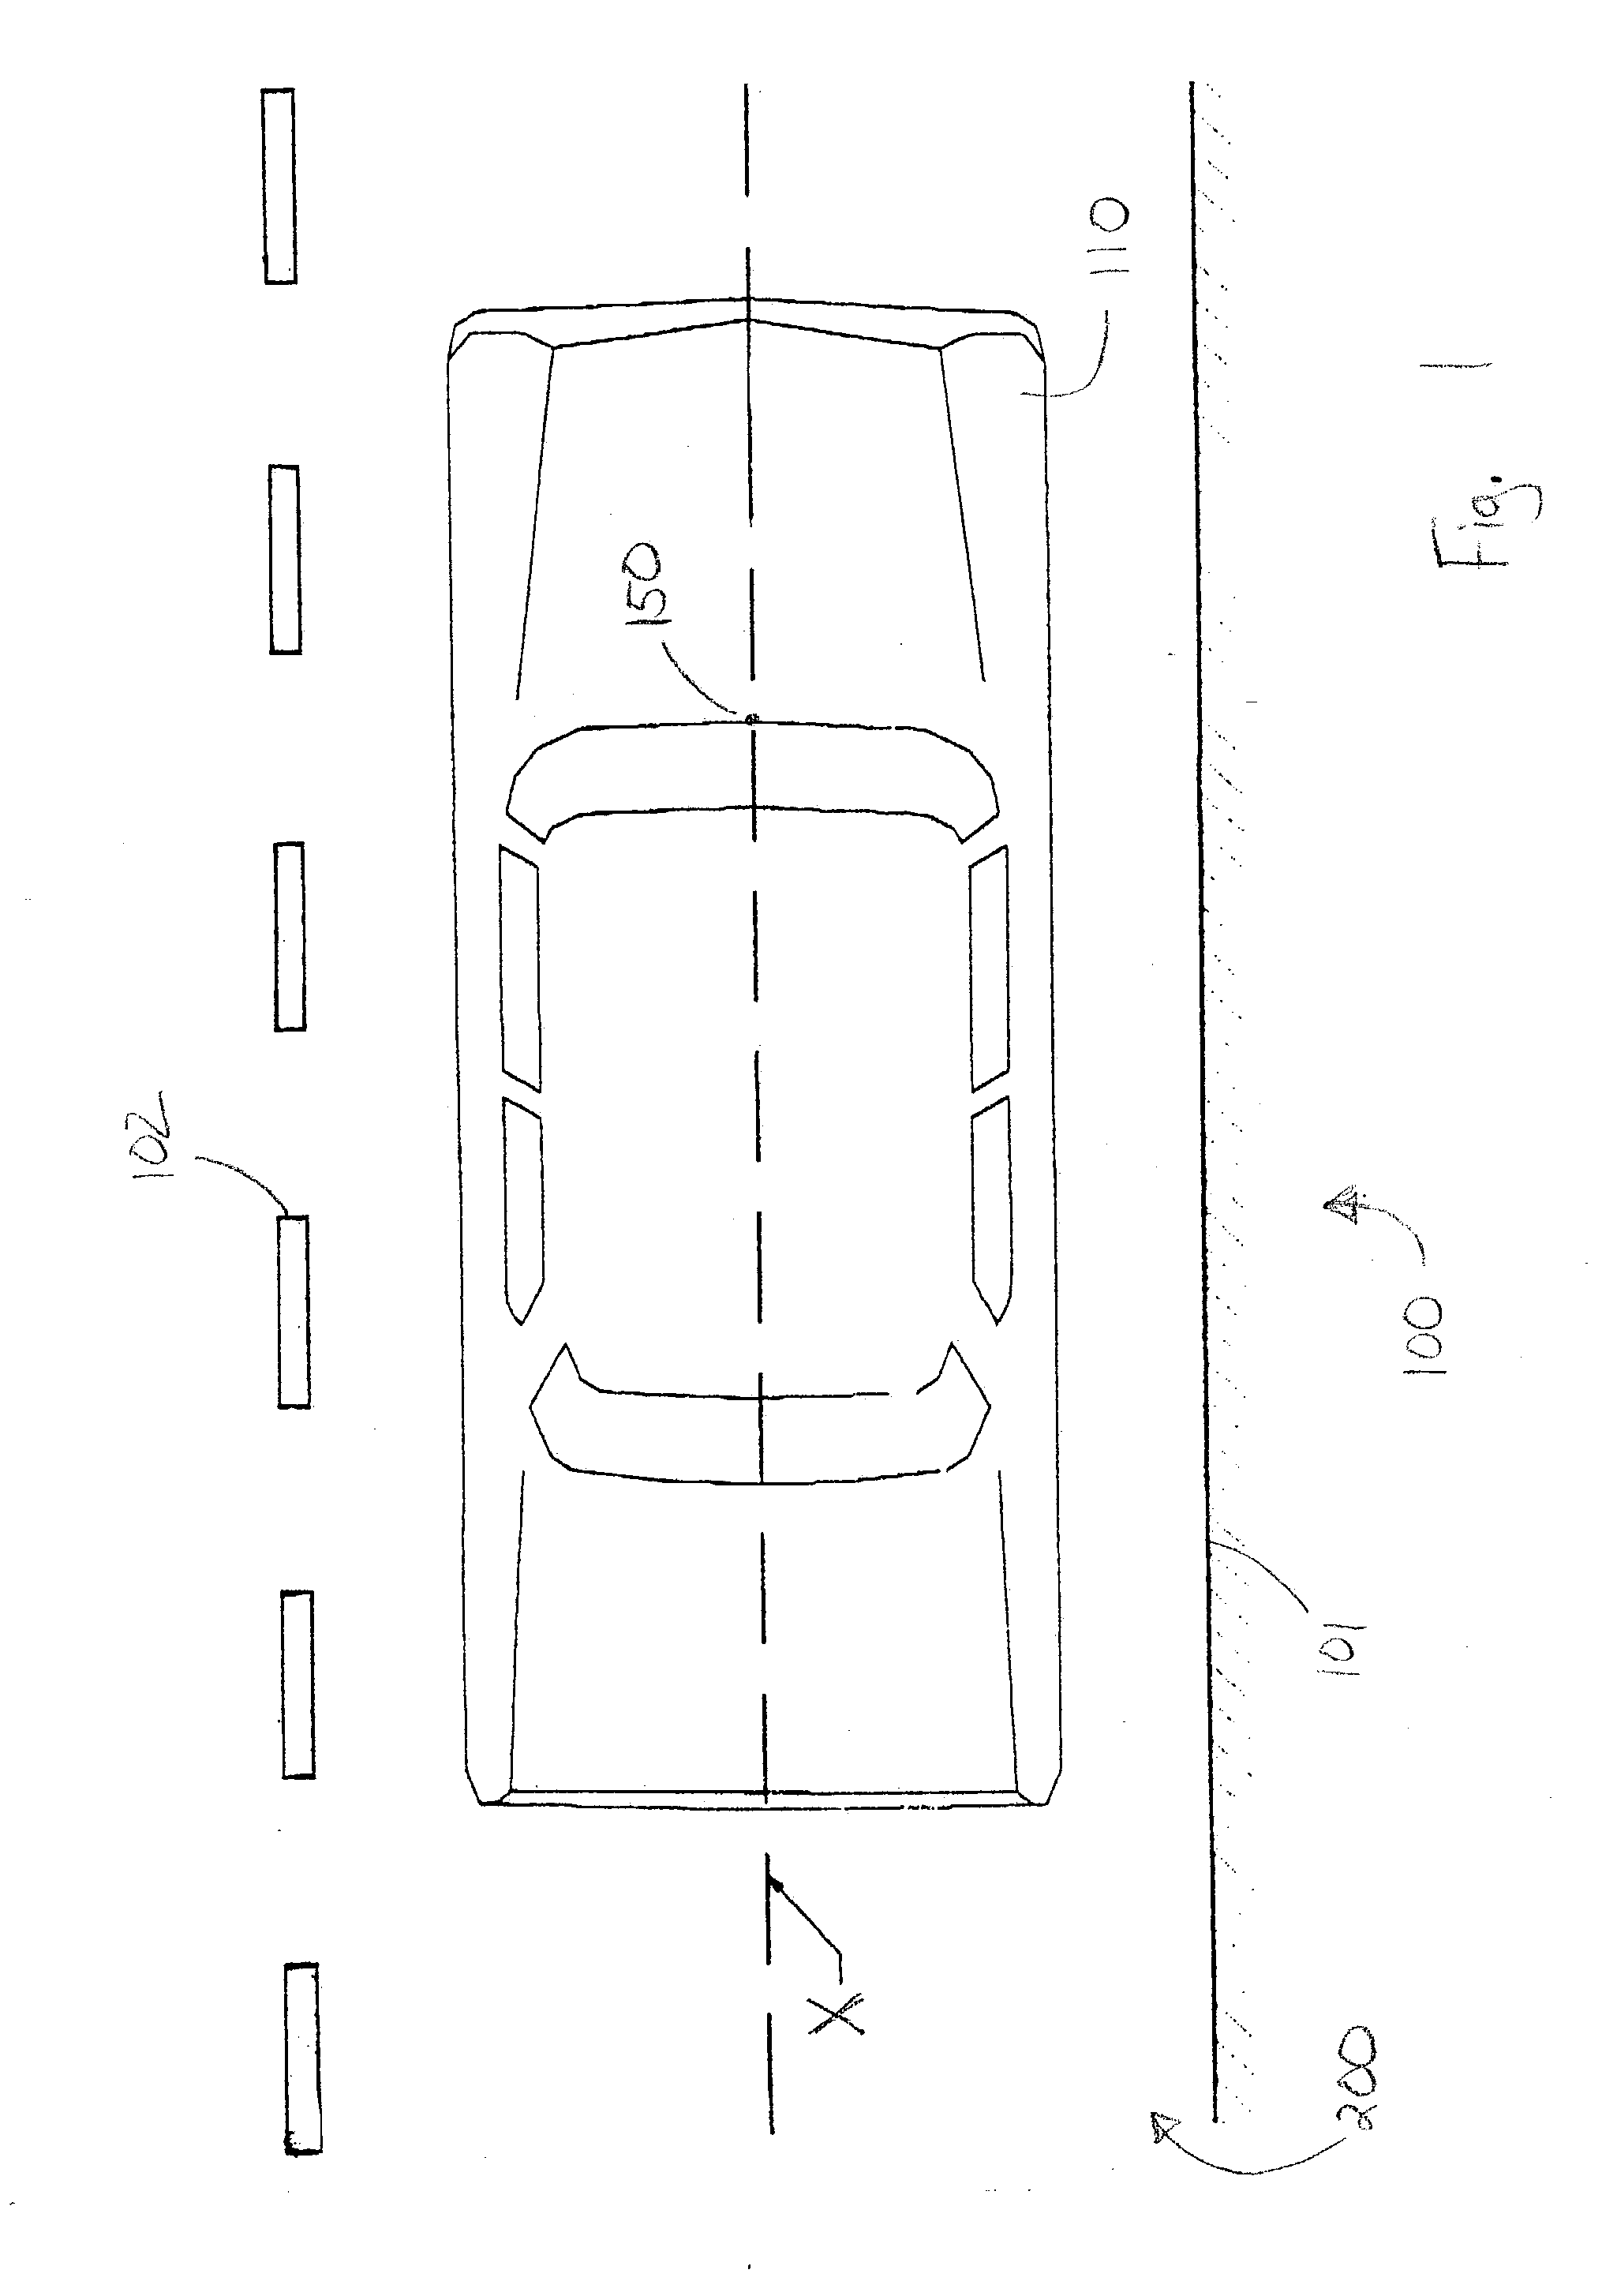 Laser device for guiding a vehicle